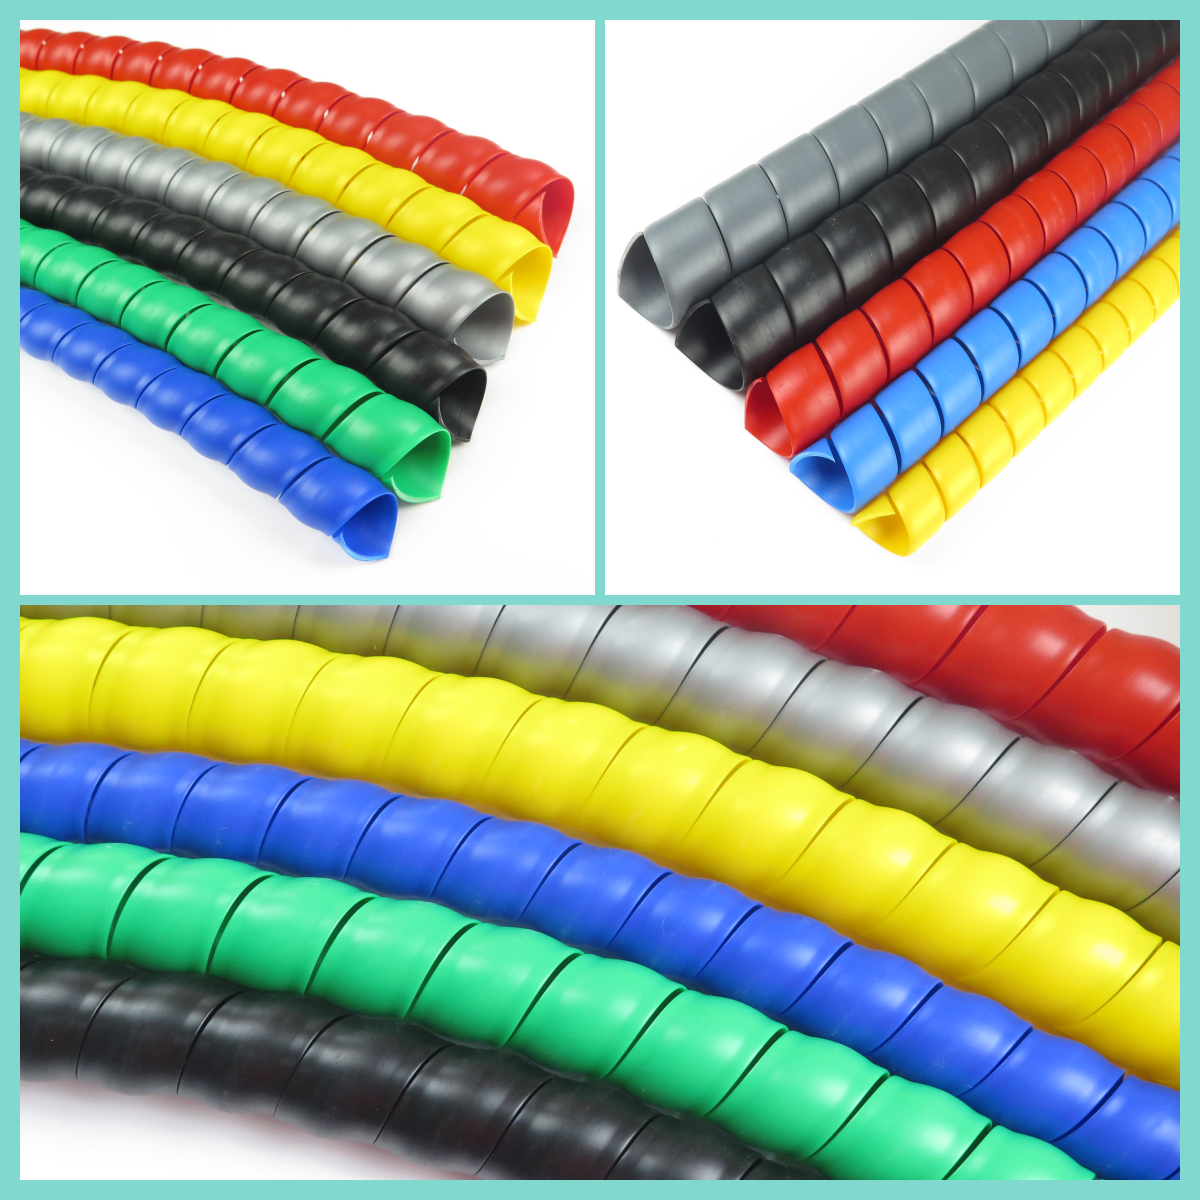 Protection Hose, as the name suggests, are used to protect hoses so that they can resist aging and friction under certain conditions.